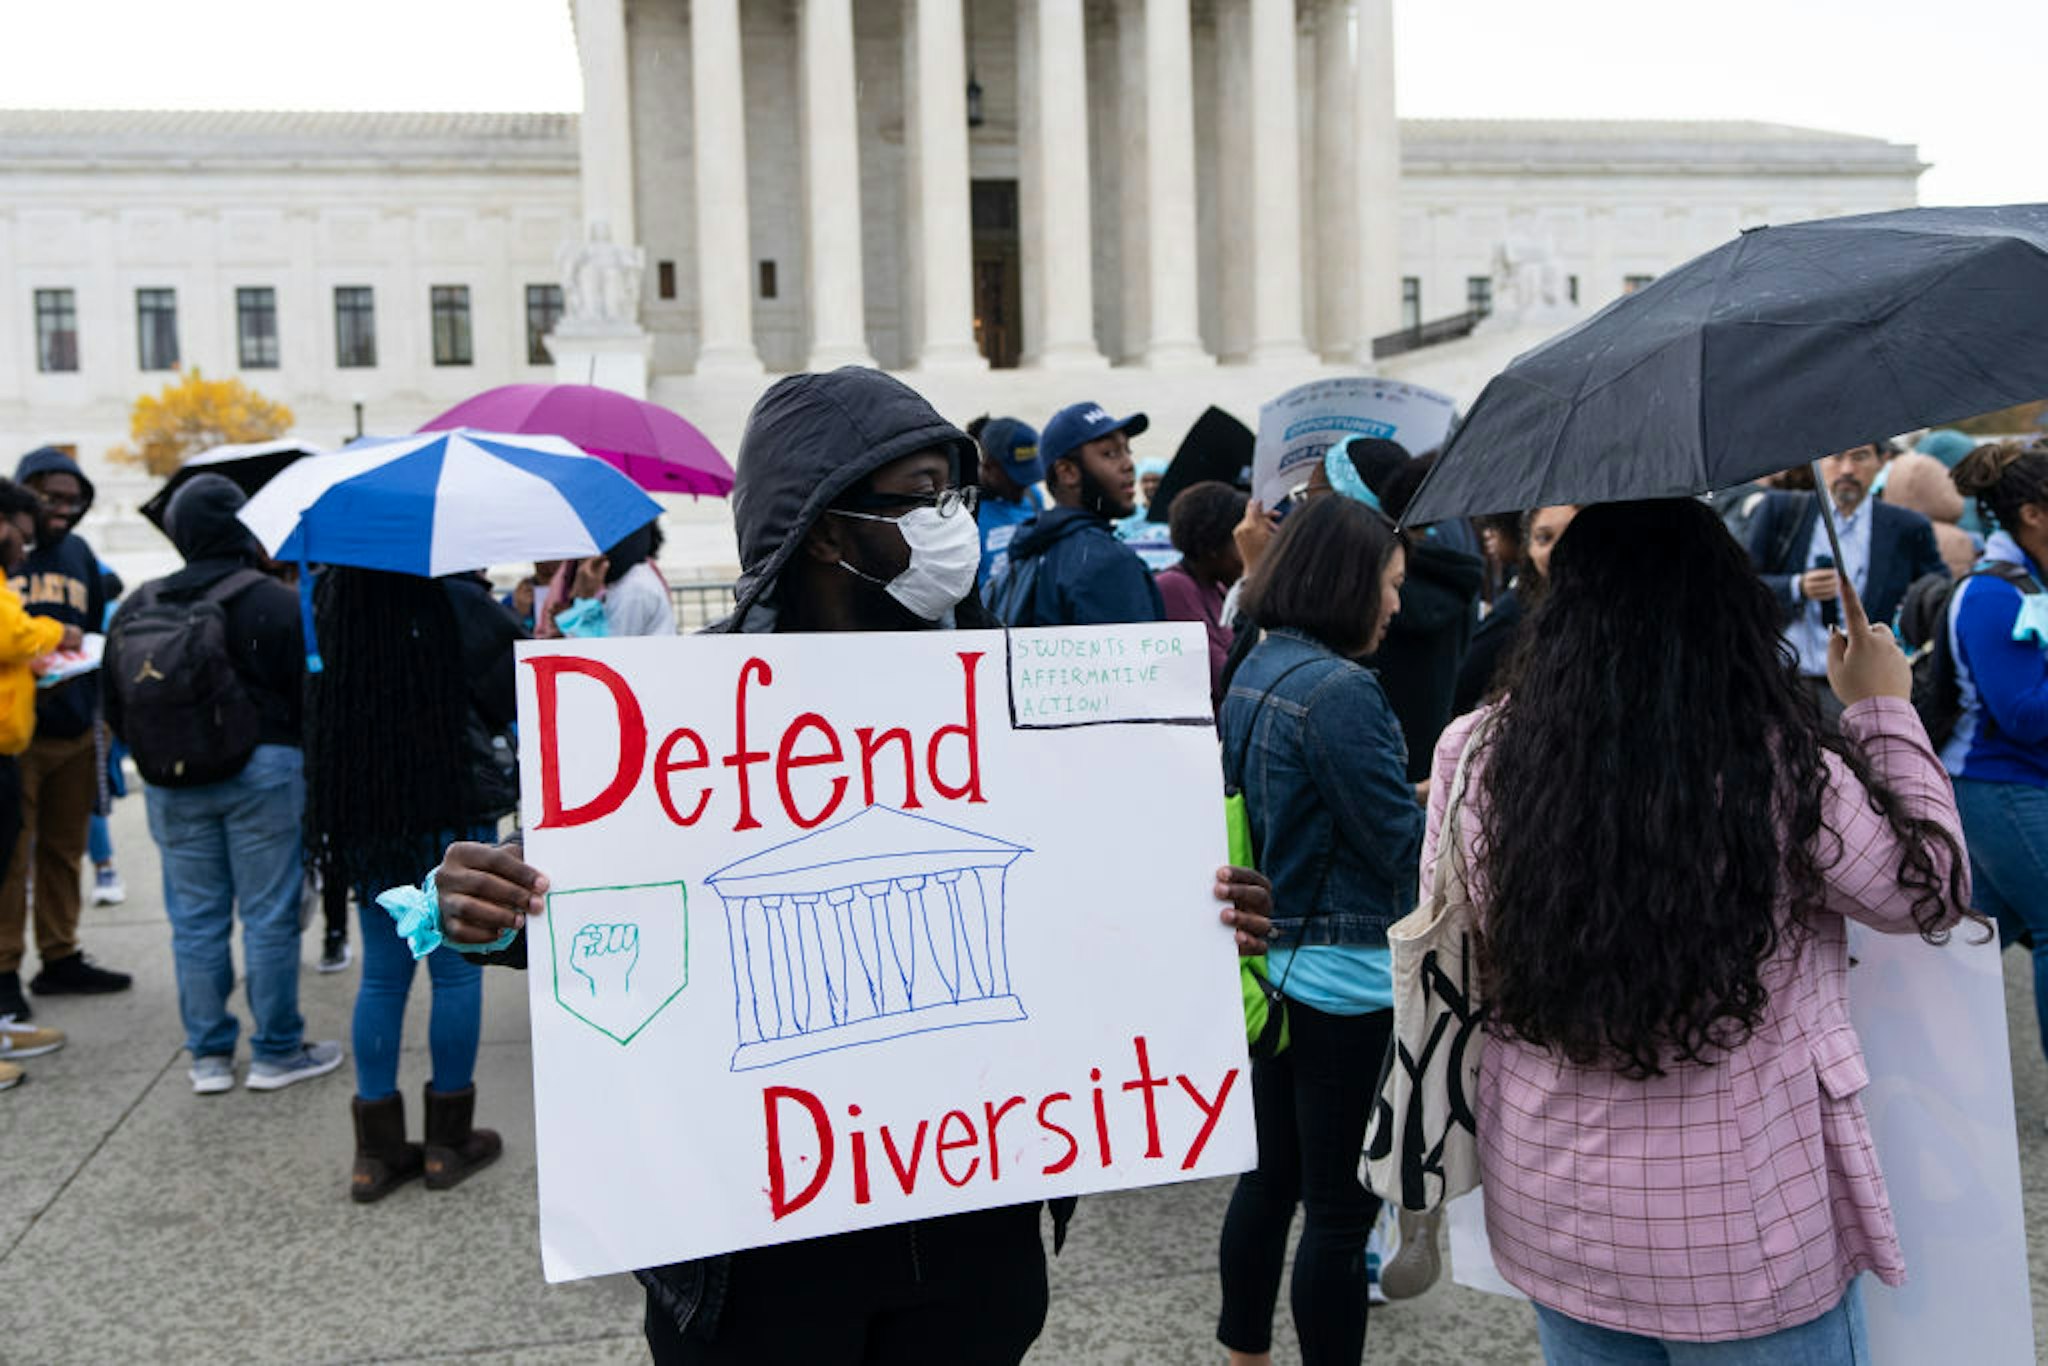 UNITED STATES - OCTOBER 31: Protesters gather in front of the U.S. Supreme Court as affirmative action cases involving Harvard and University of North Carolina admissions are heard by the court in Washington on Monday, October 31, 2022. (Bill Clark/CQ-Roll Call, Inc via Getty Images)